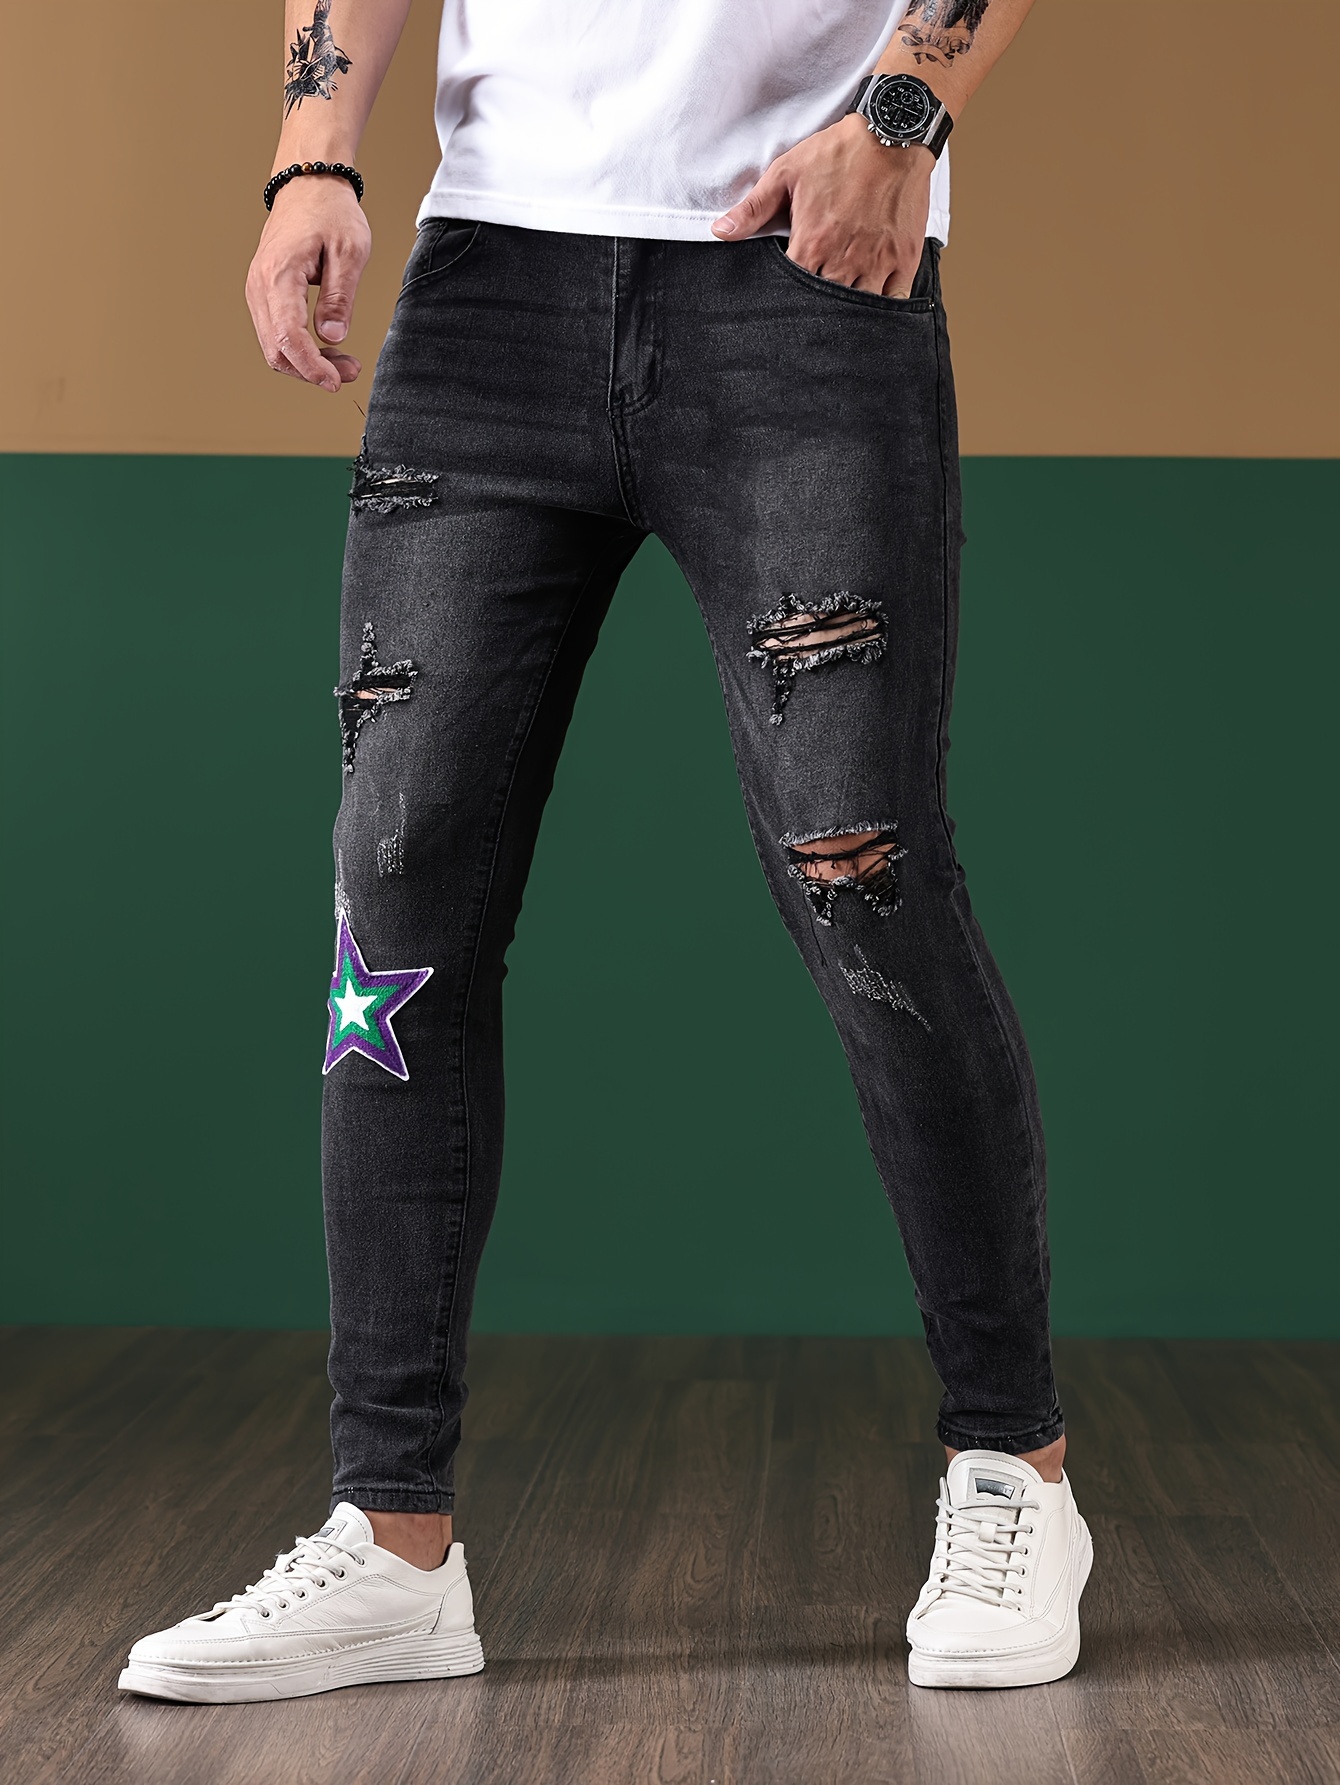 Mens Slim Fit Skinny Jeans With Orange Star Patches Biker Denim Stretch  Cult, Motorcycle Jeans Trendy Long Straight Hip Hop Style With Hole Blue  From Adultclothes, $53.21